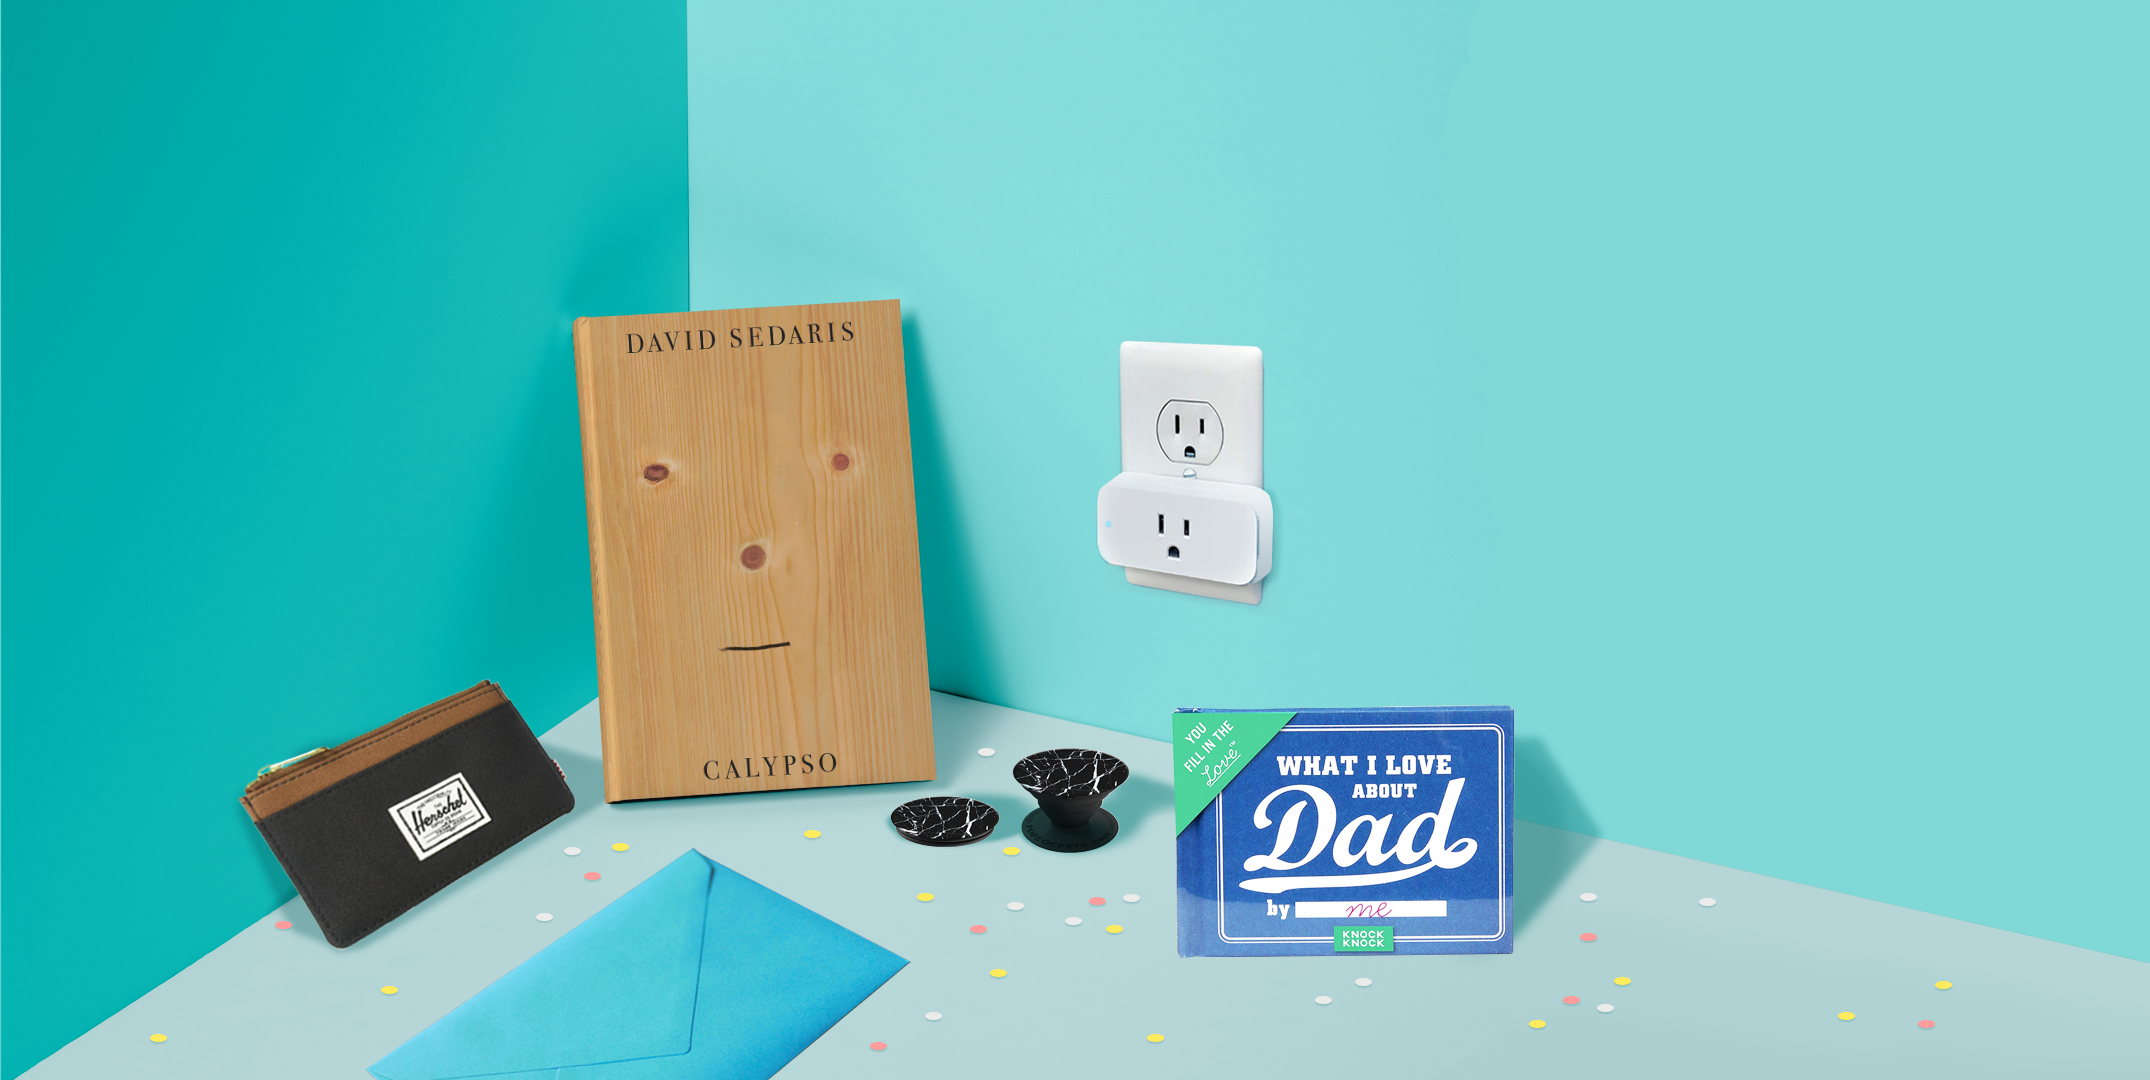 gifts for dad